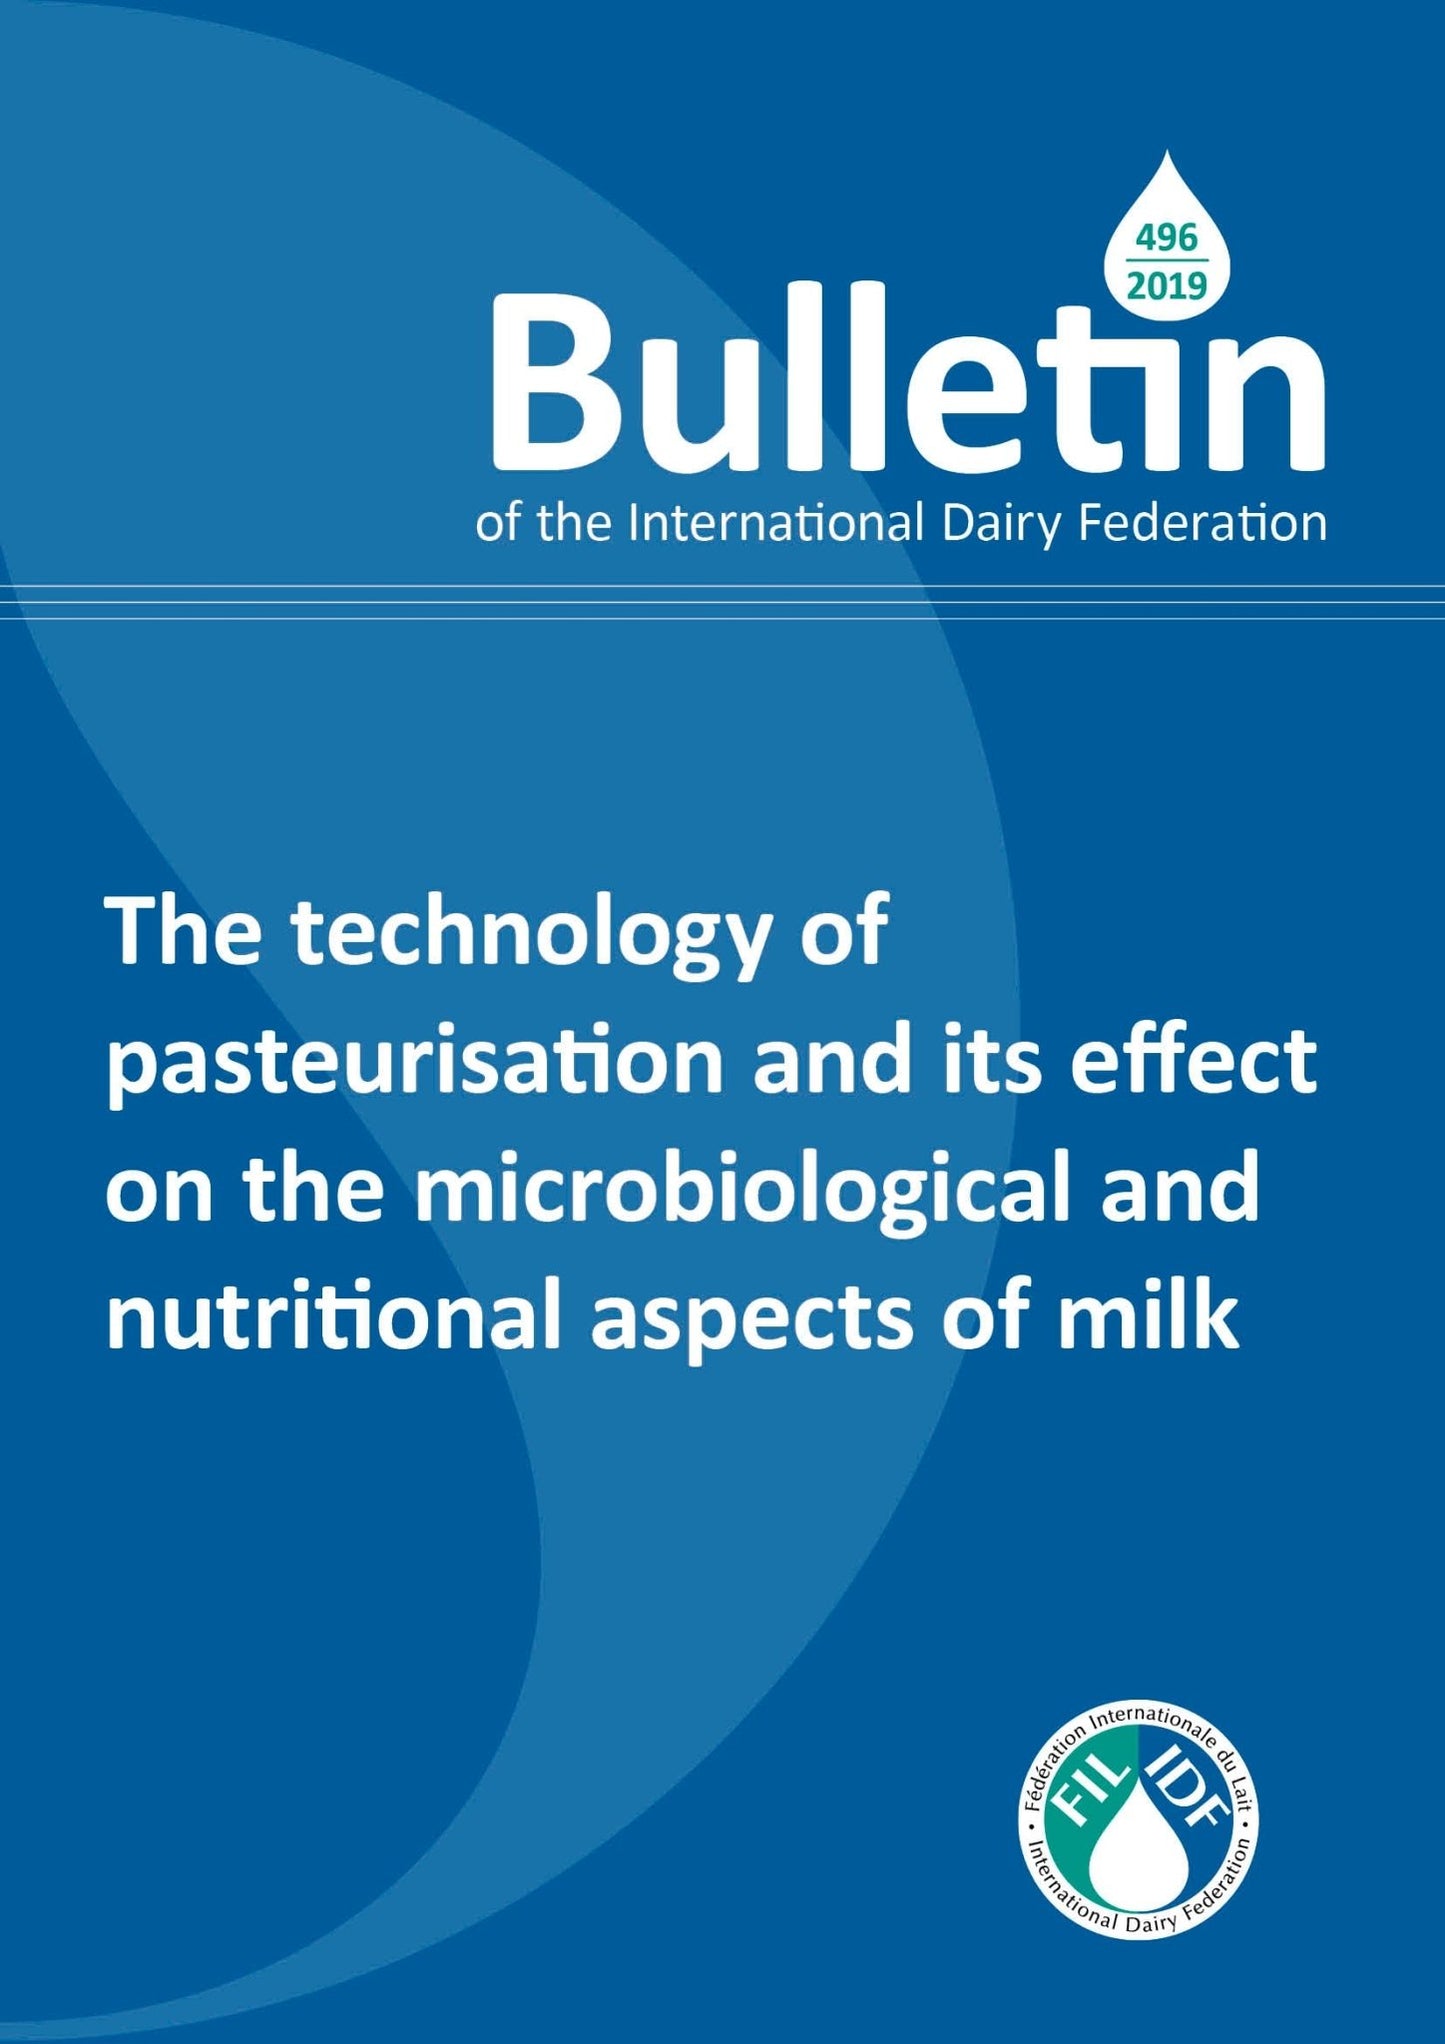 Bulletin of the IDF N° 496/2019: The technology of pasteurisation and its effect on the microbiological and nutritional aspects of milk - FIL-IDF